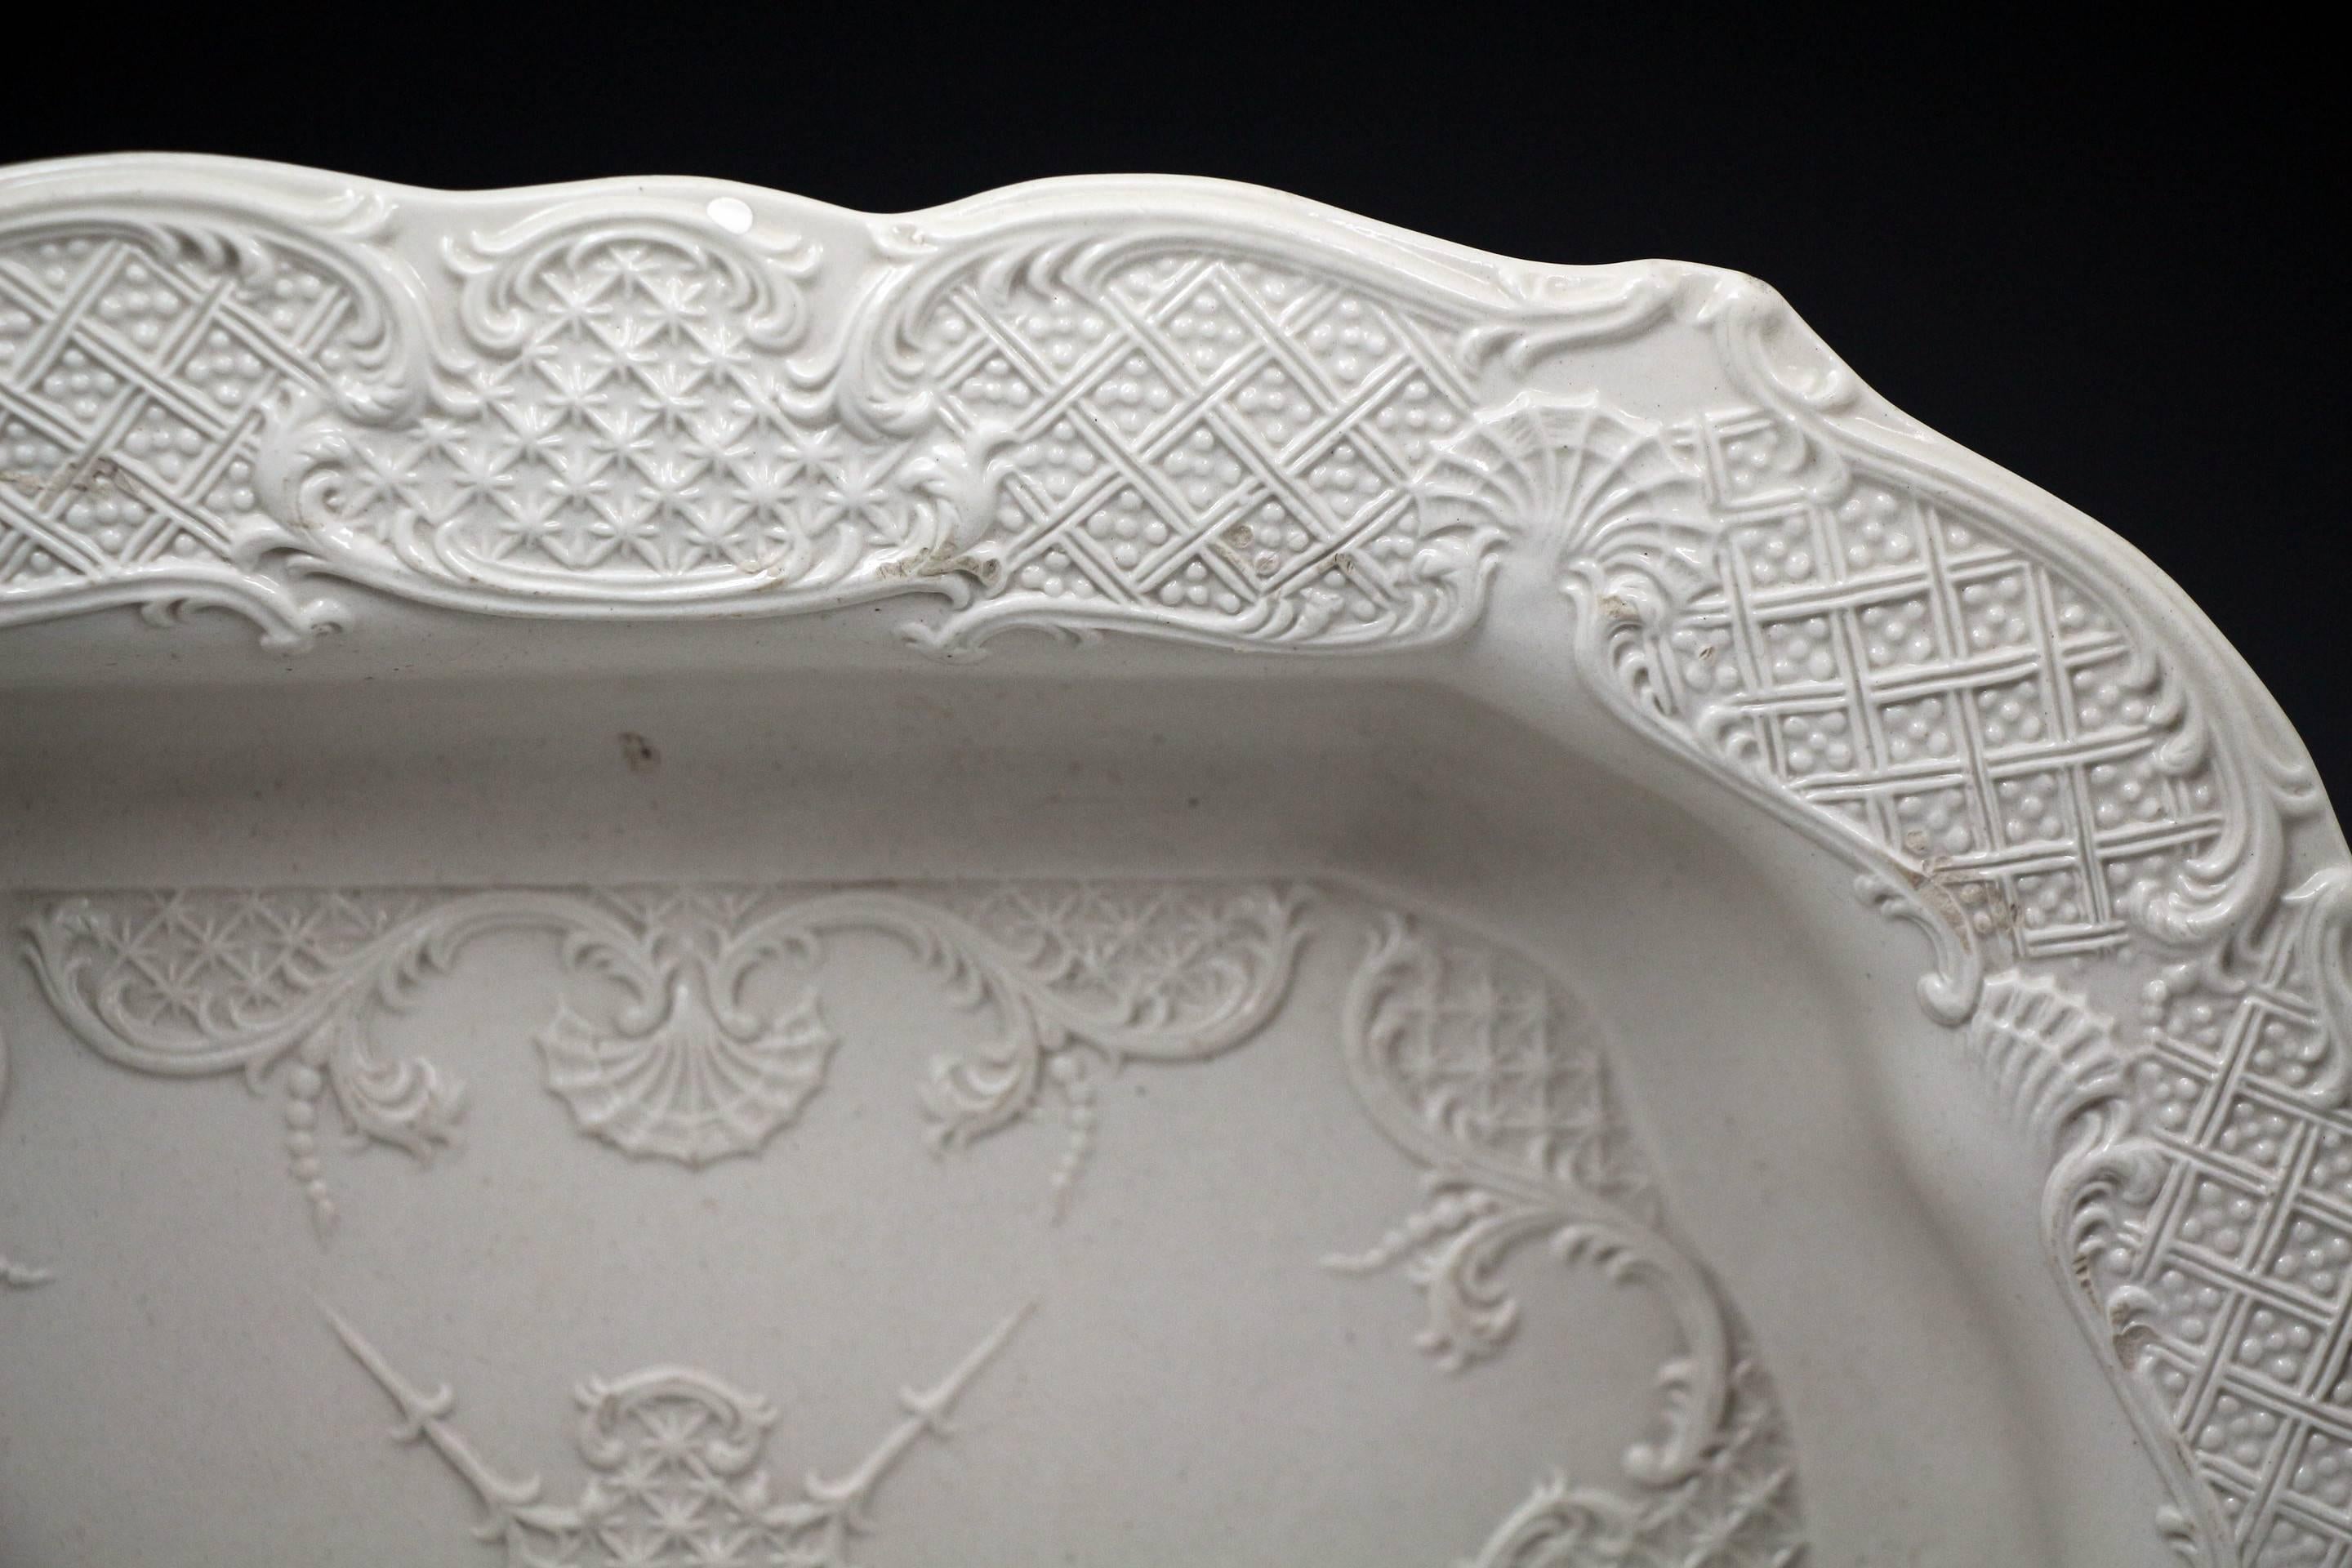 Salt glaze pottery stoneware dish decorated with elaborate rococo inspired relief molding patterns. 
The deep dish is in very clean crisp condition. 
A fine piece with texture and elegance, Staffordshire circa 1765 